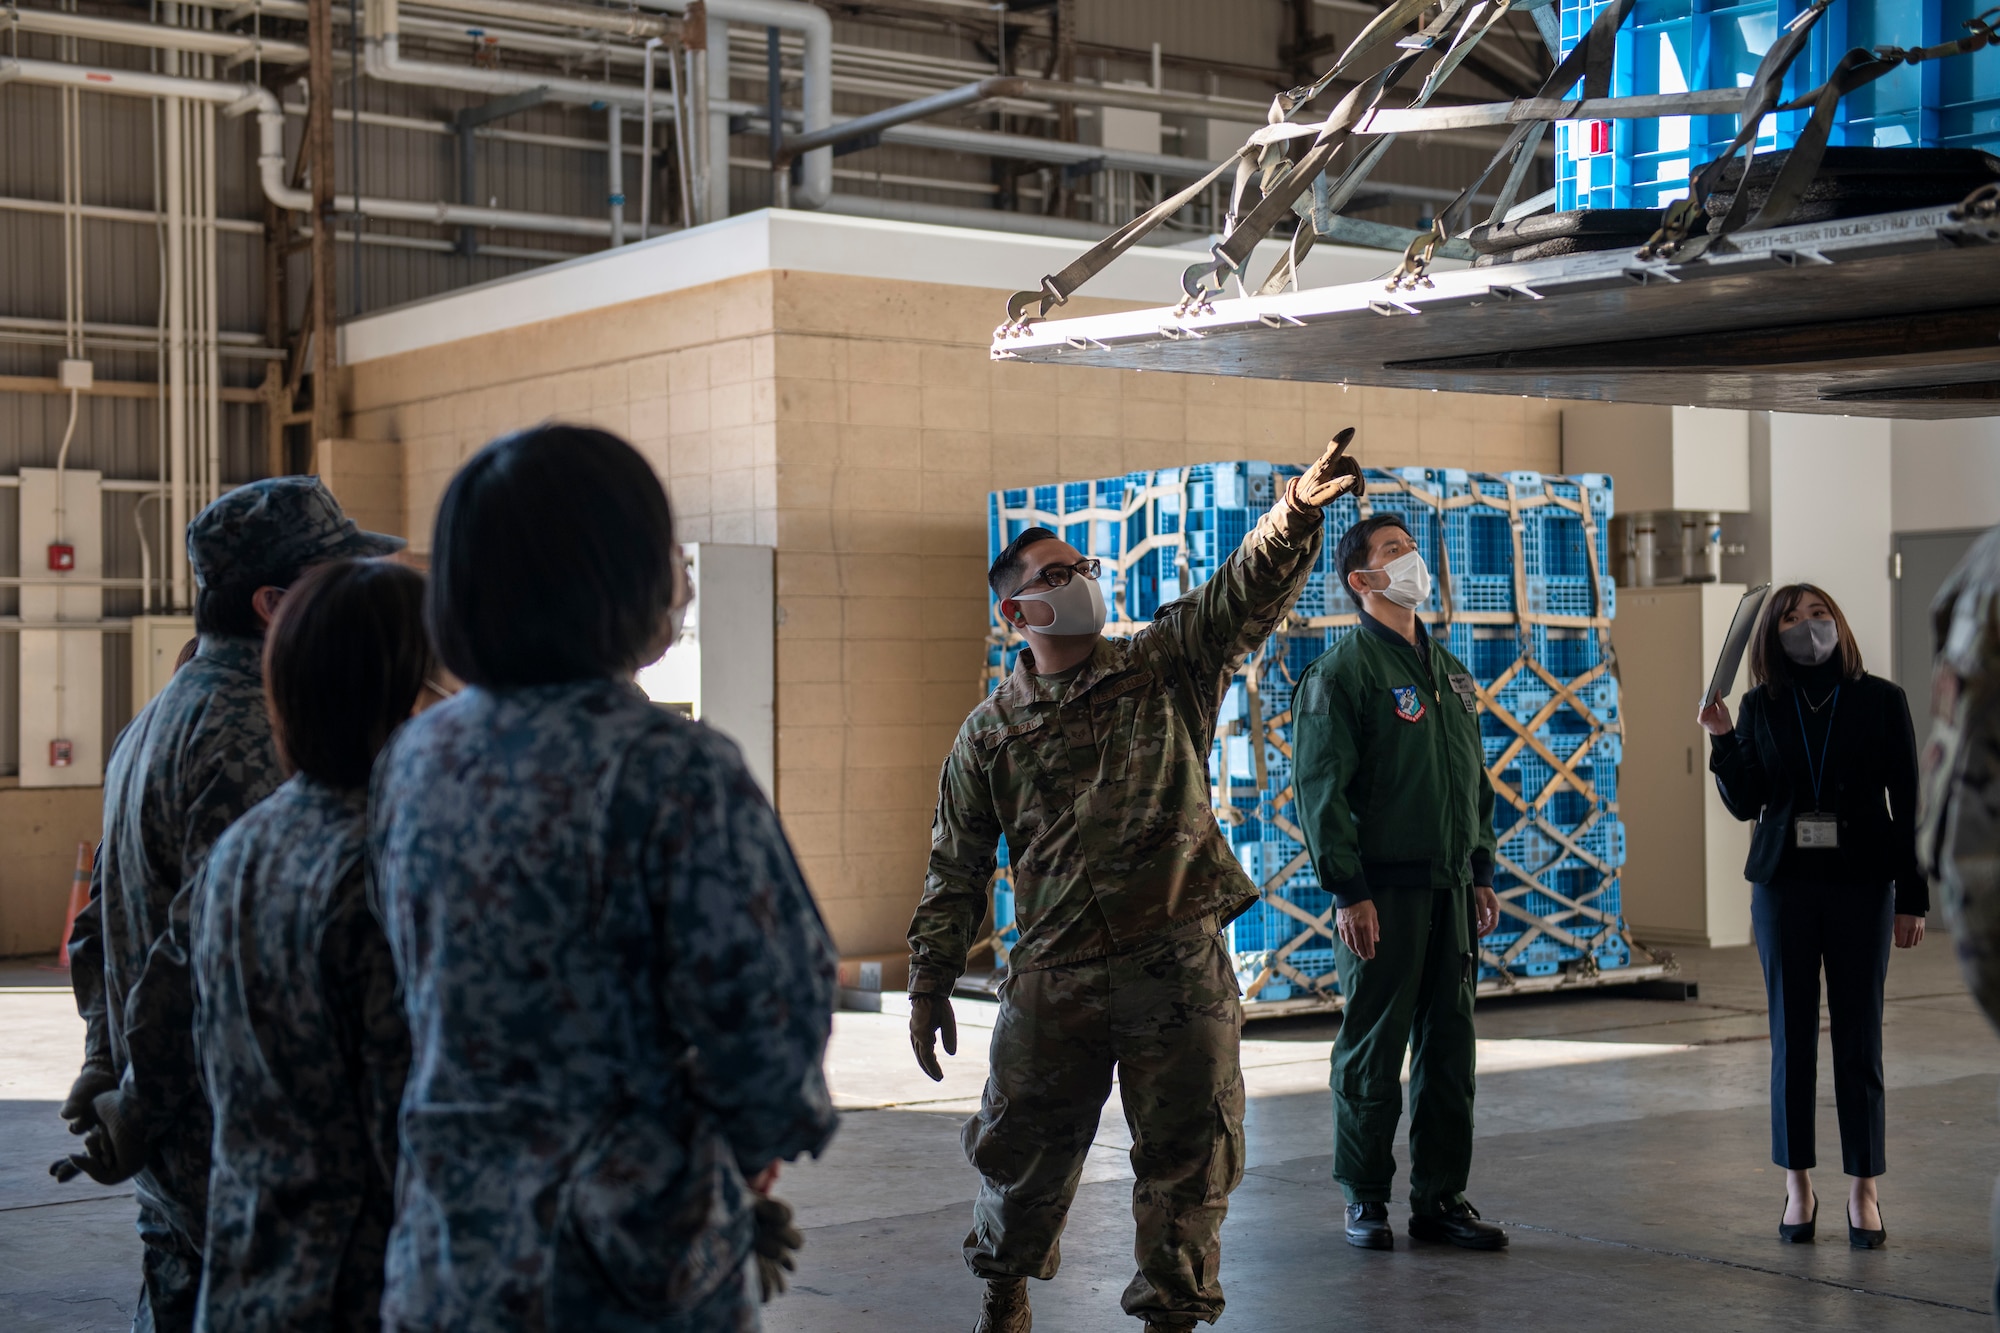 A U.S. Air Force Airman explains cargo pallet inspections to members of the Japan Air Self Defense Force